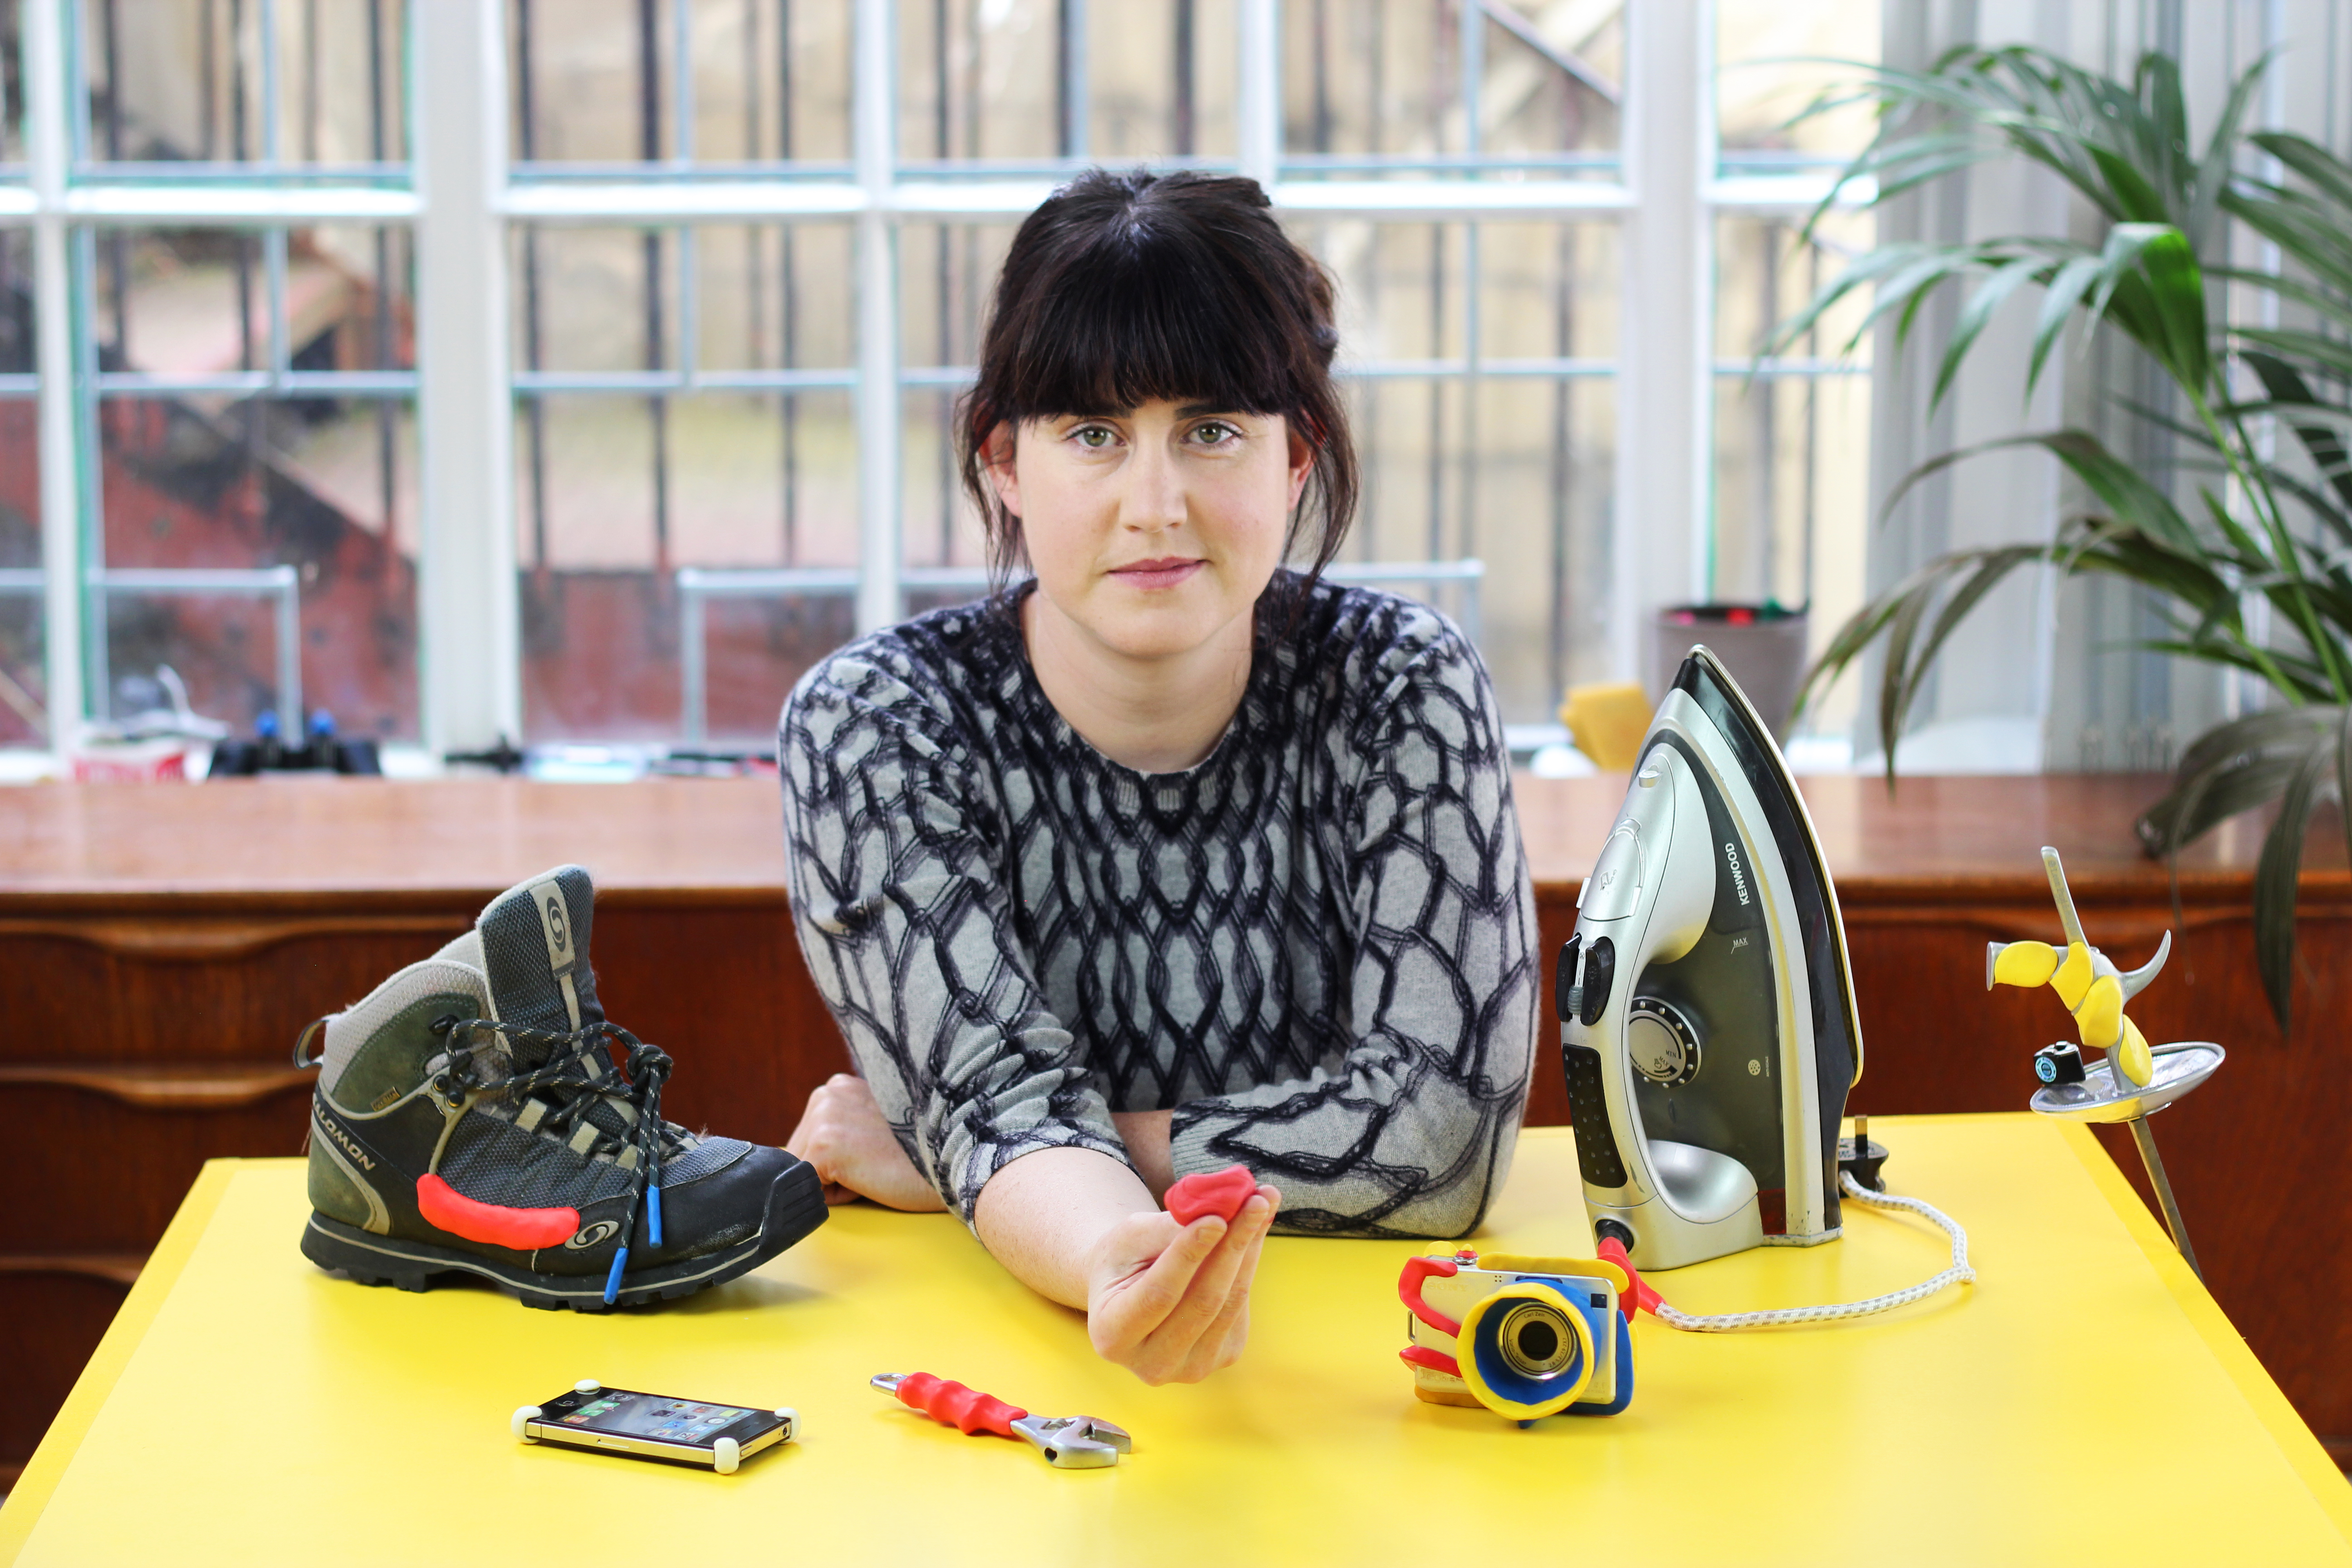 The story of Sugru. Is bigger necessarily better? —